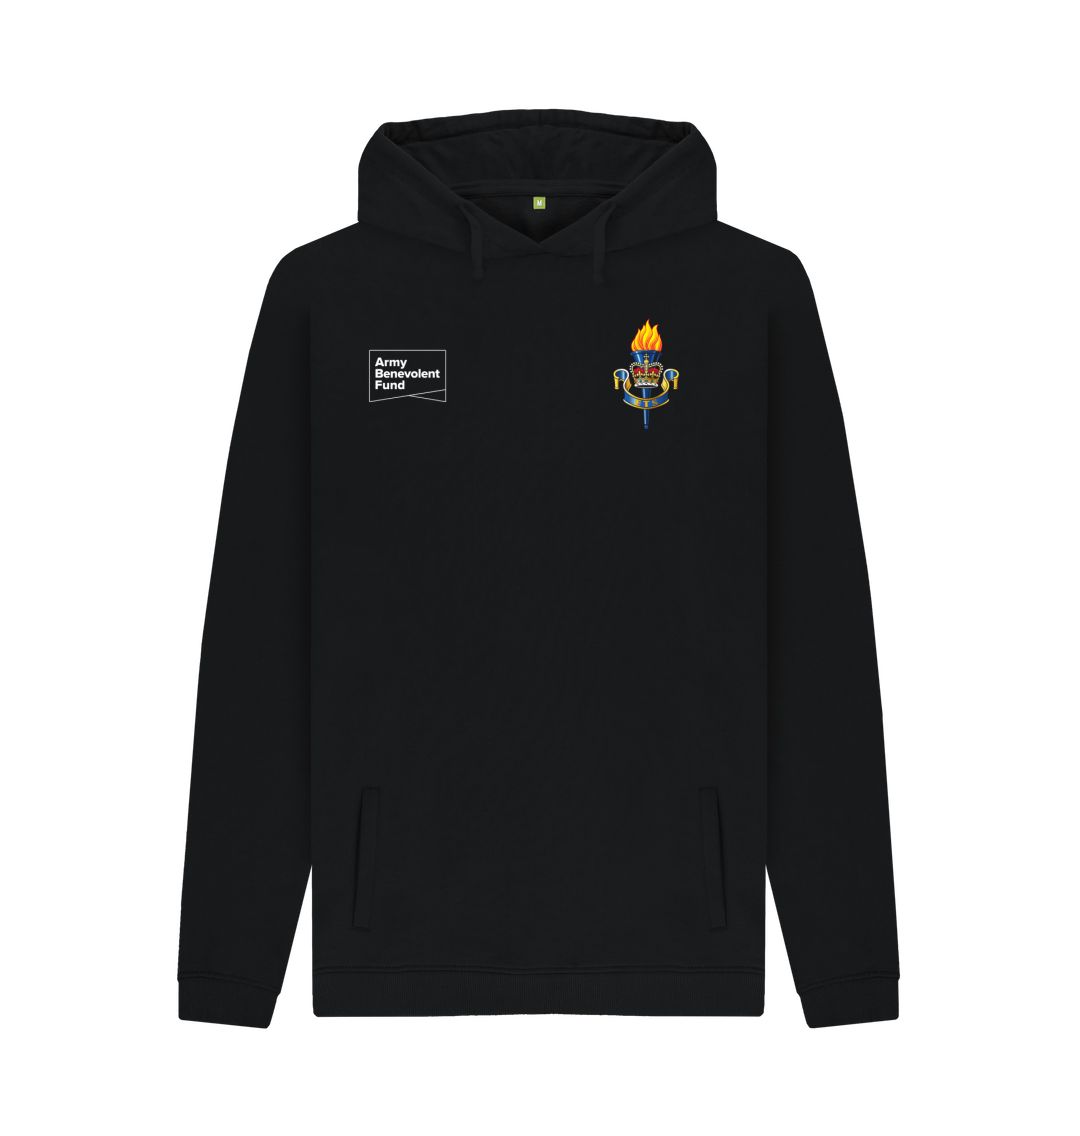 Adjutant General's Corps Educational & Training Services Unisex Hoodie - Army Benevolent Fund